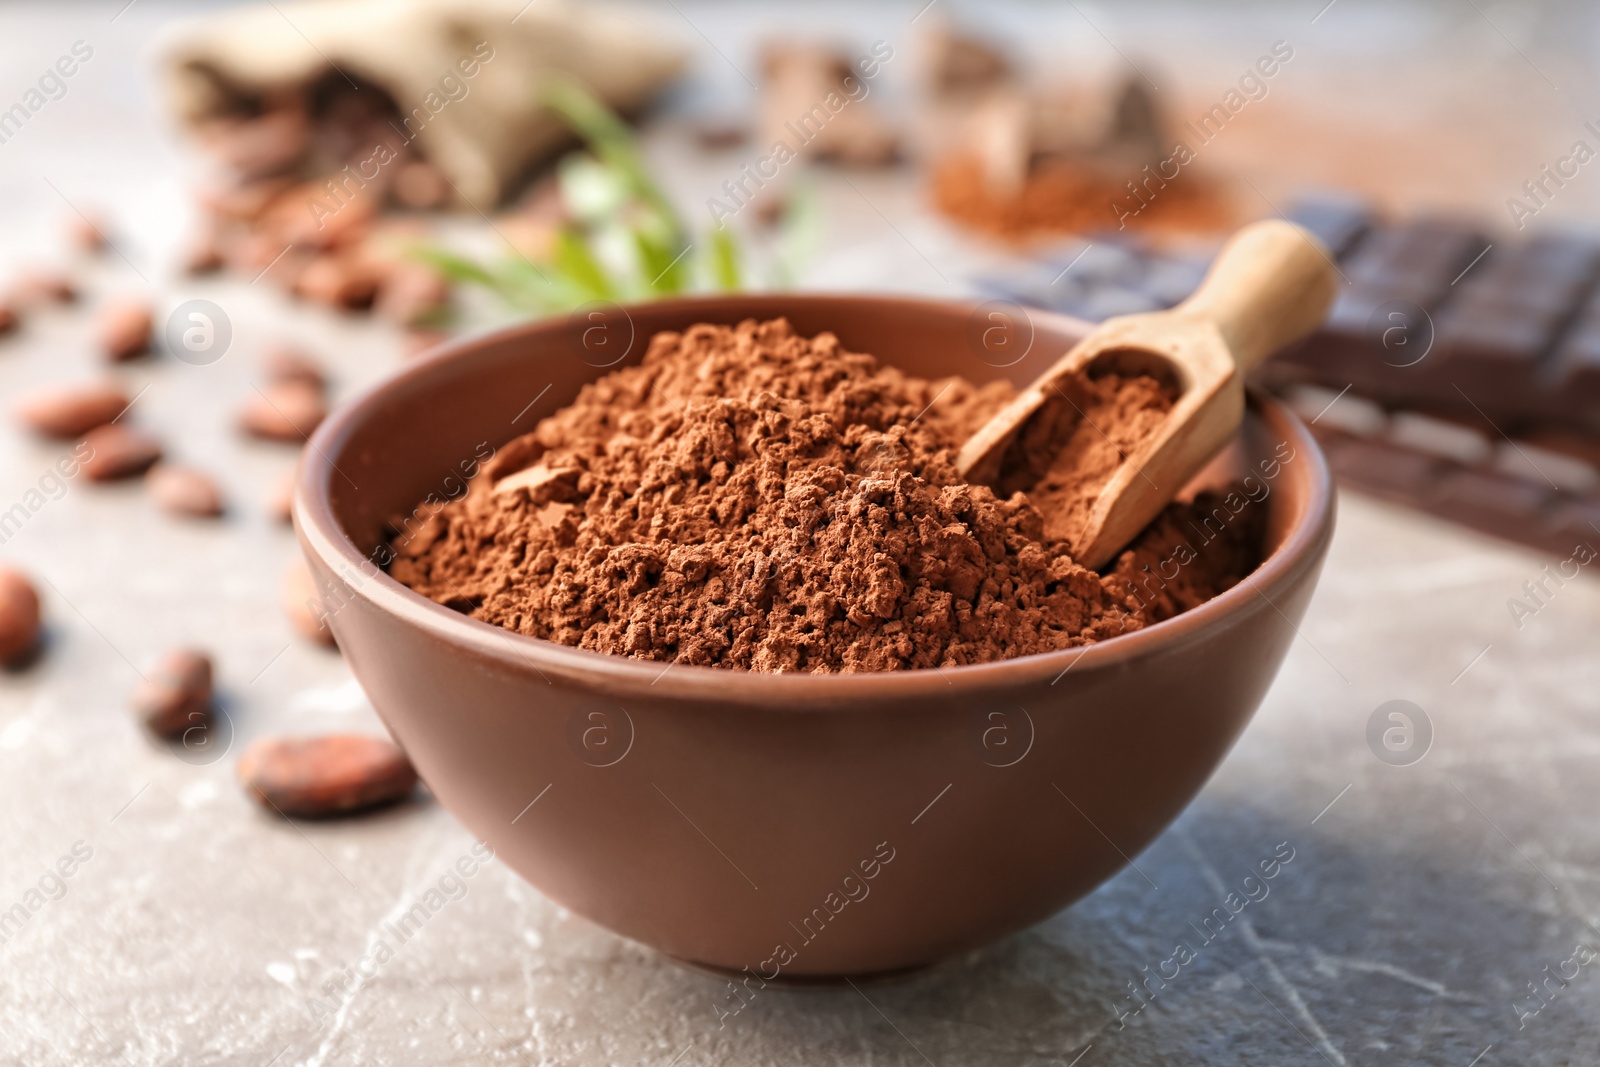 Photo of Bowl with cocoa powder on table